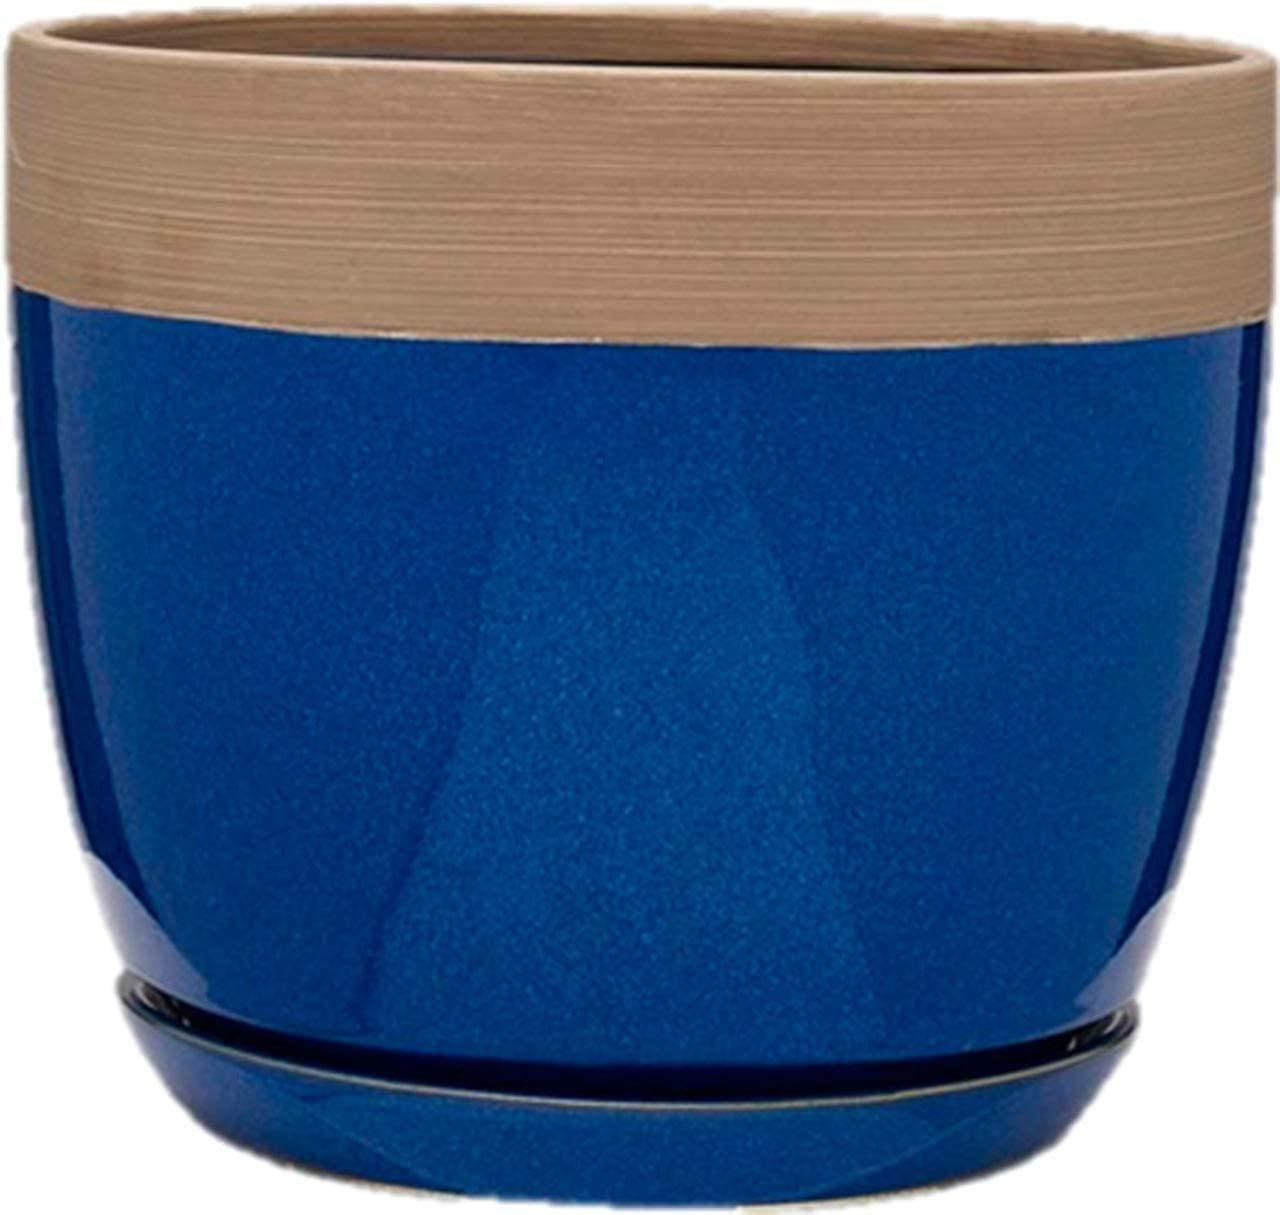 Ana Navy Ceramic 12" Planter with Wood-Look Rim and Drainage